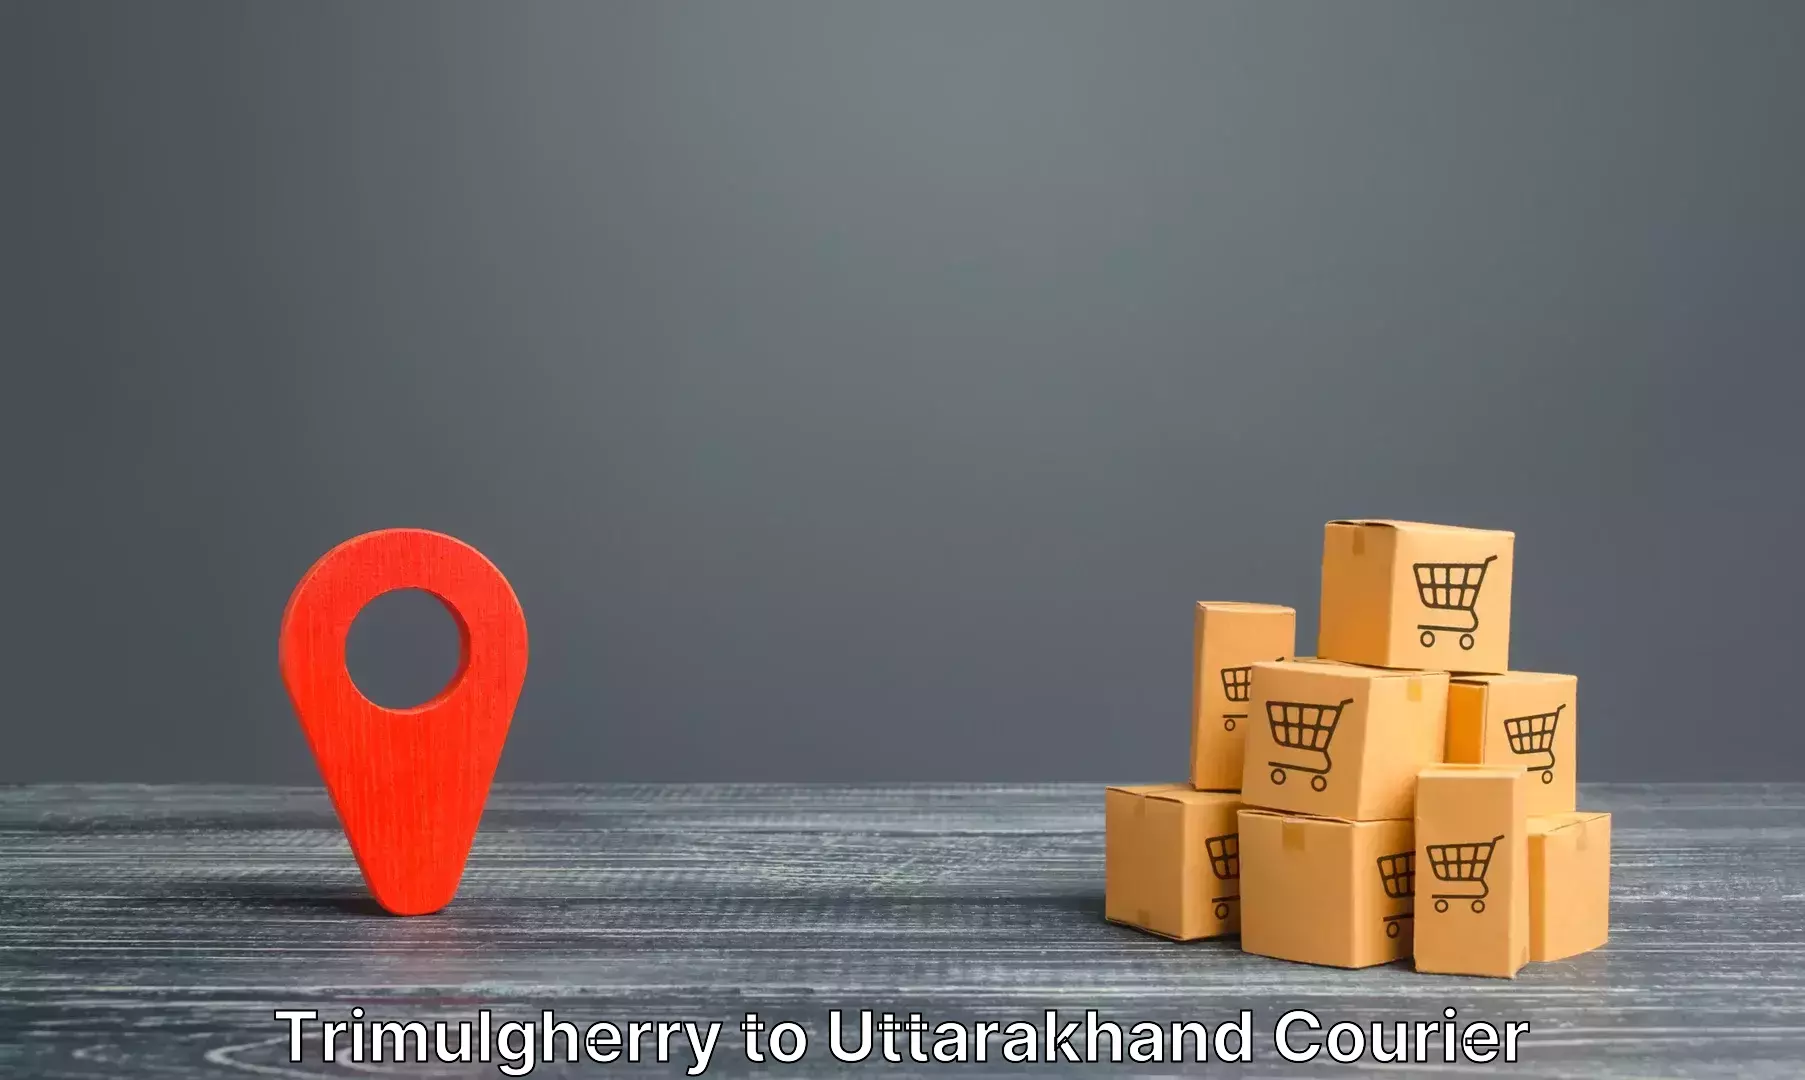 Hassle-free luggage shipping Trimulgherry to Roorkee